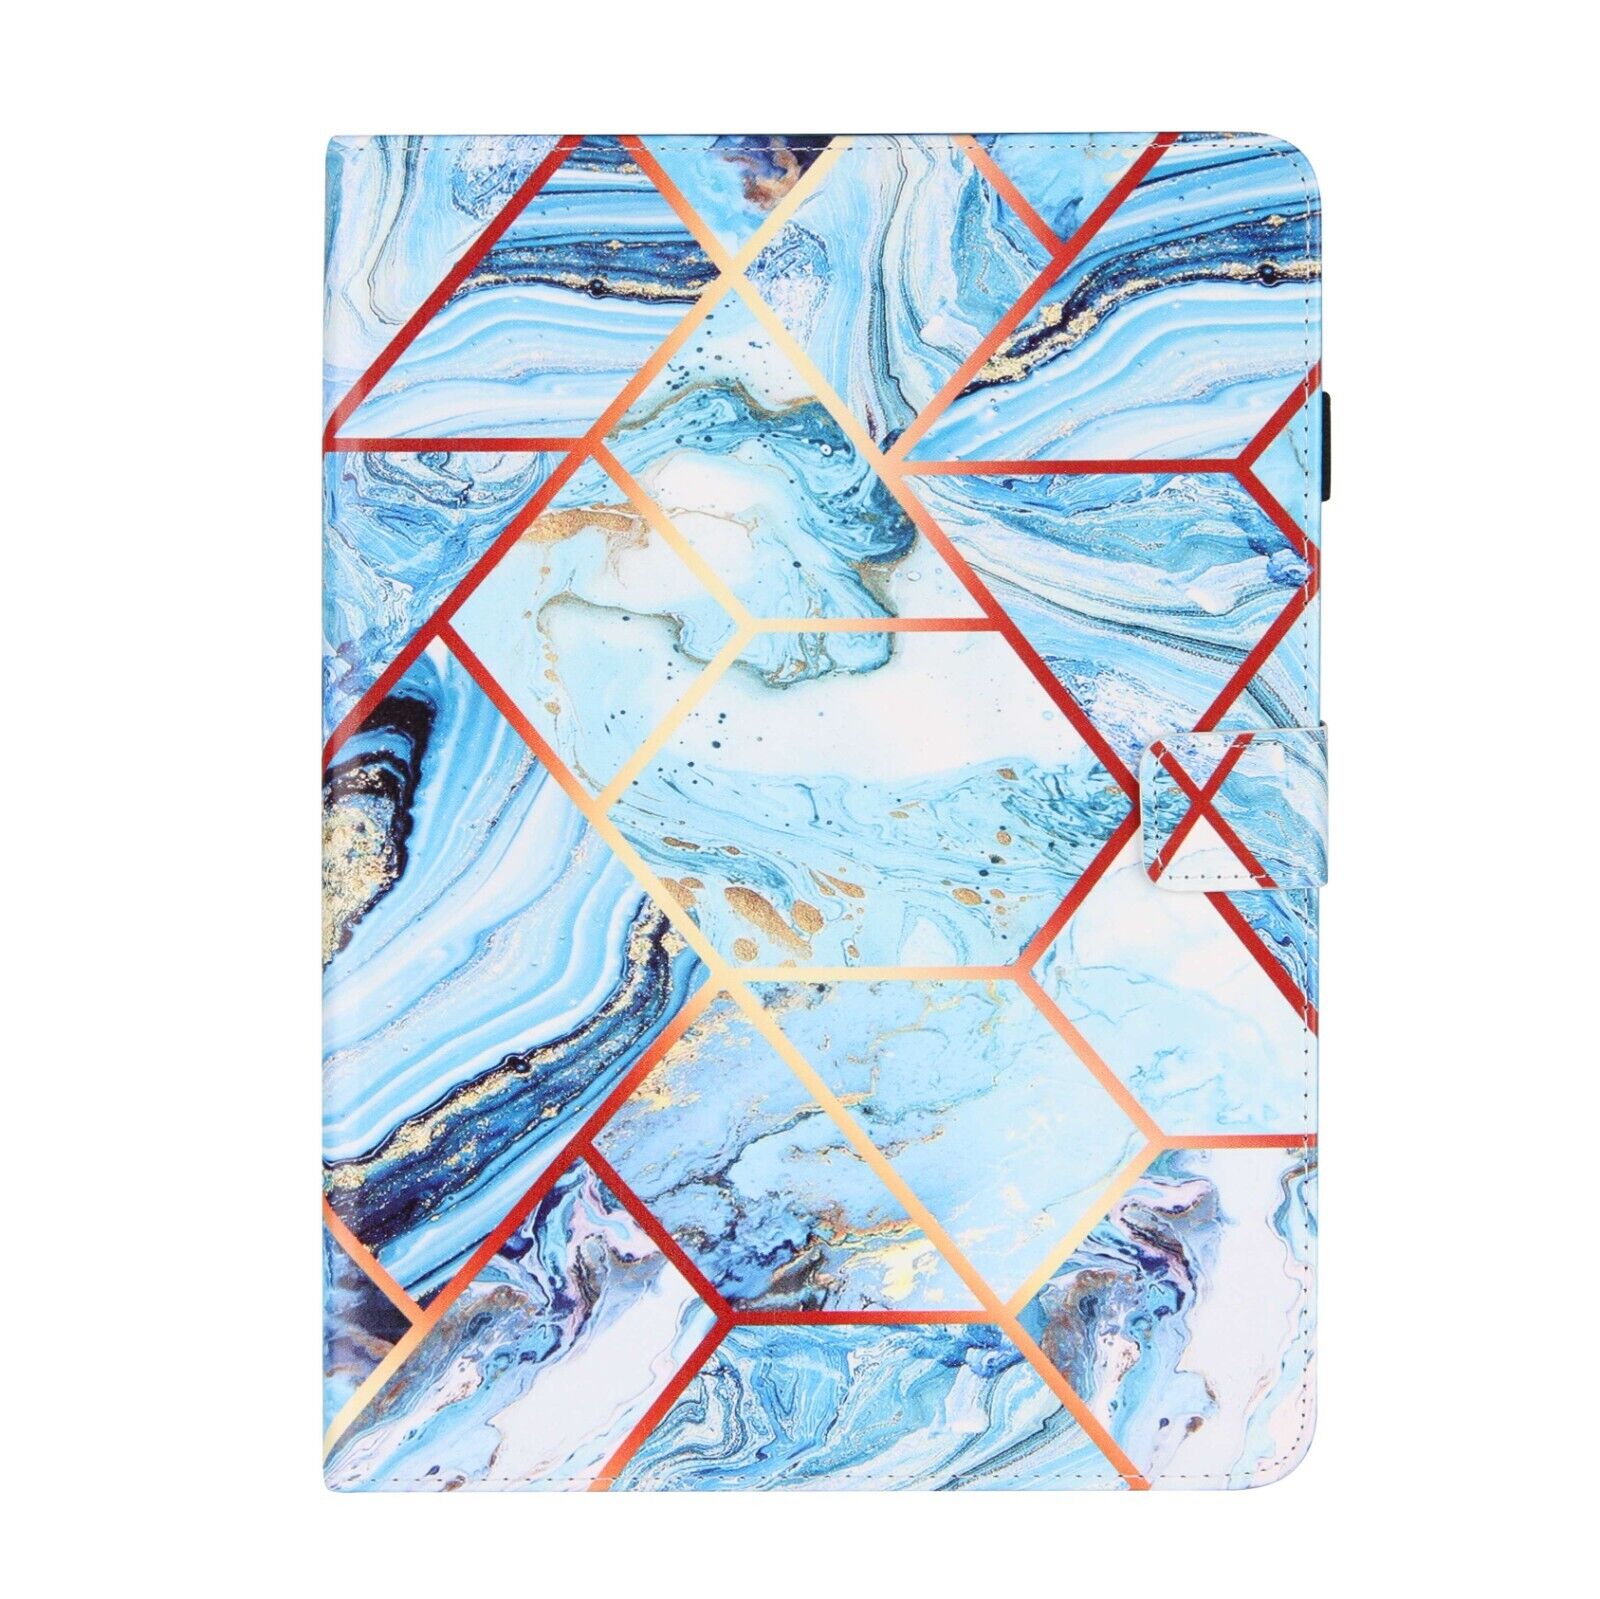 Business Patchwork Marbling iPad Case For Apple iPad Air 5 4 Pro 11 Mini 5 4 3 2